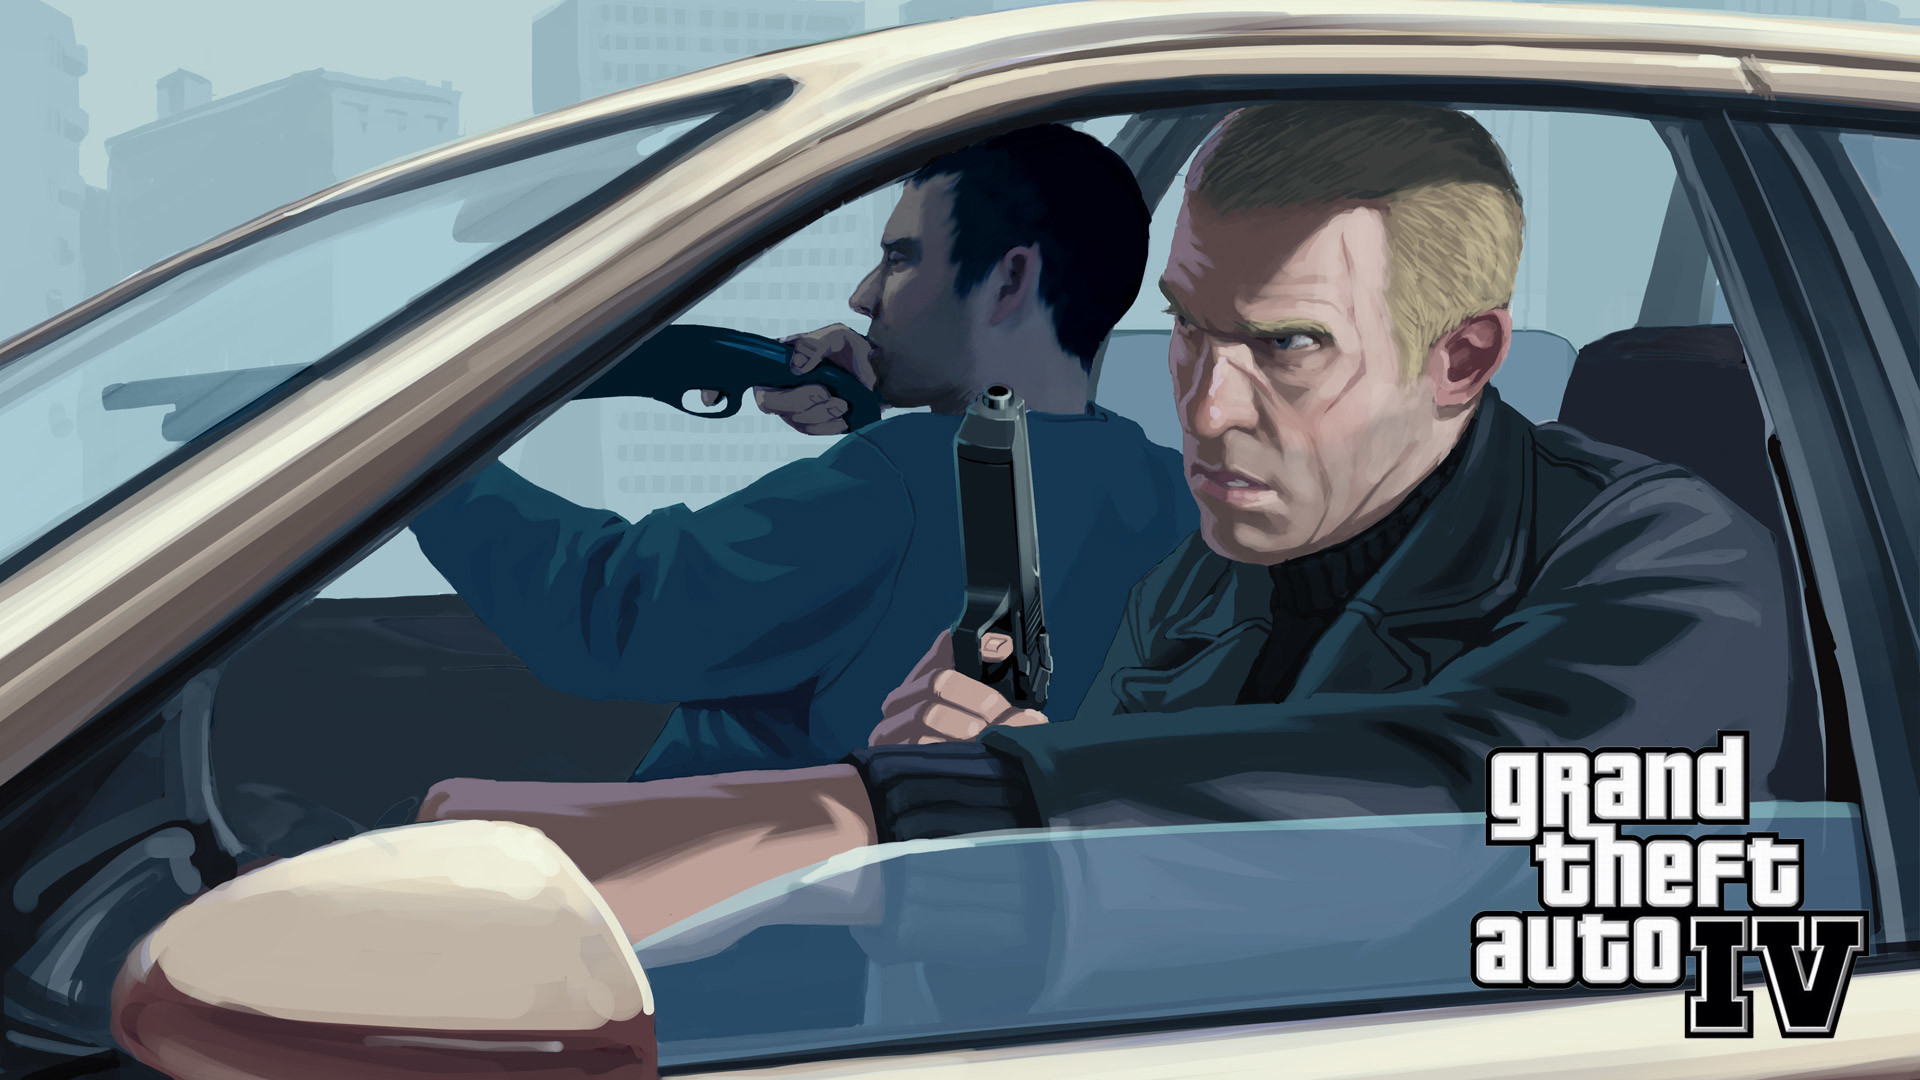 1920x1080 Free Grand Theft Auto IV Wallpaper in 